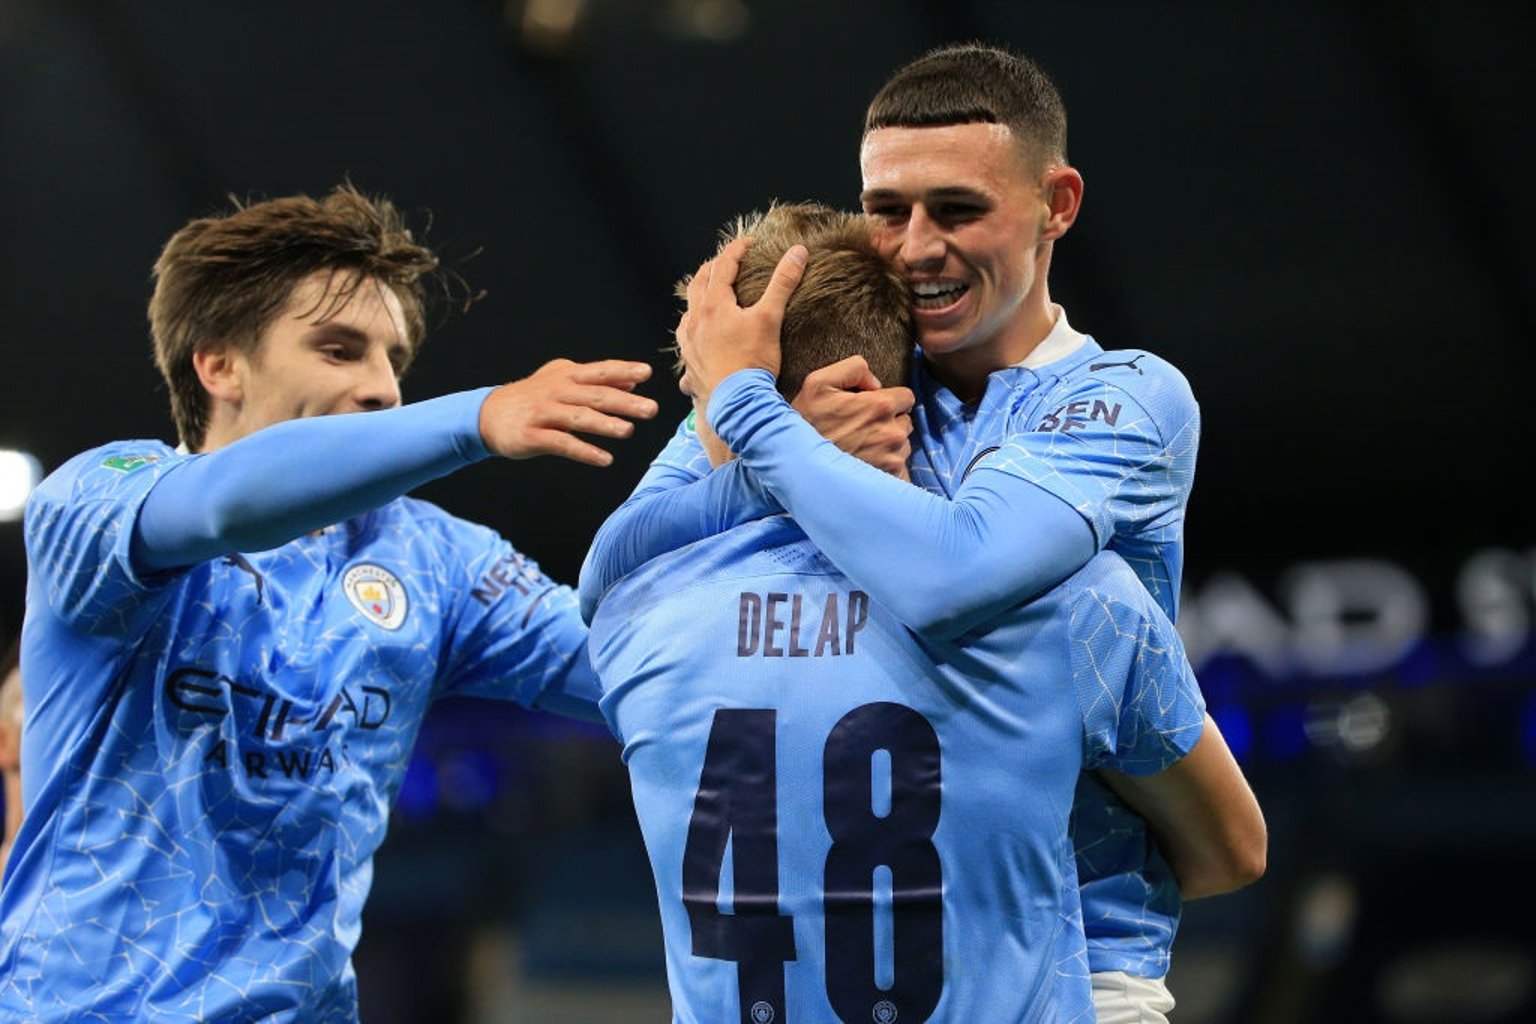 Phil Foden and Adrian Bernabe congratulate Delap